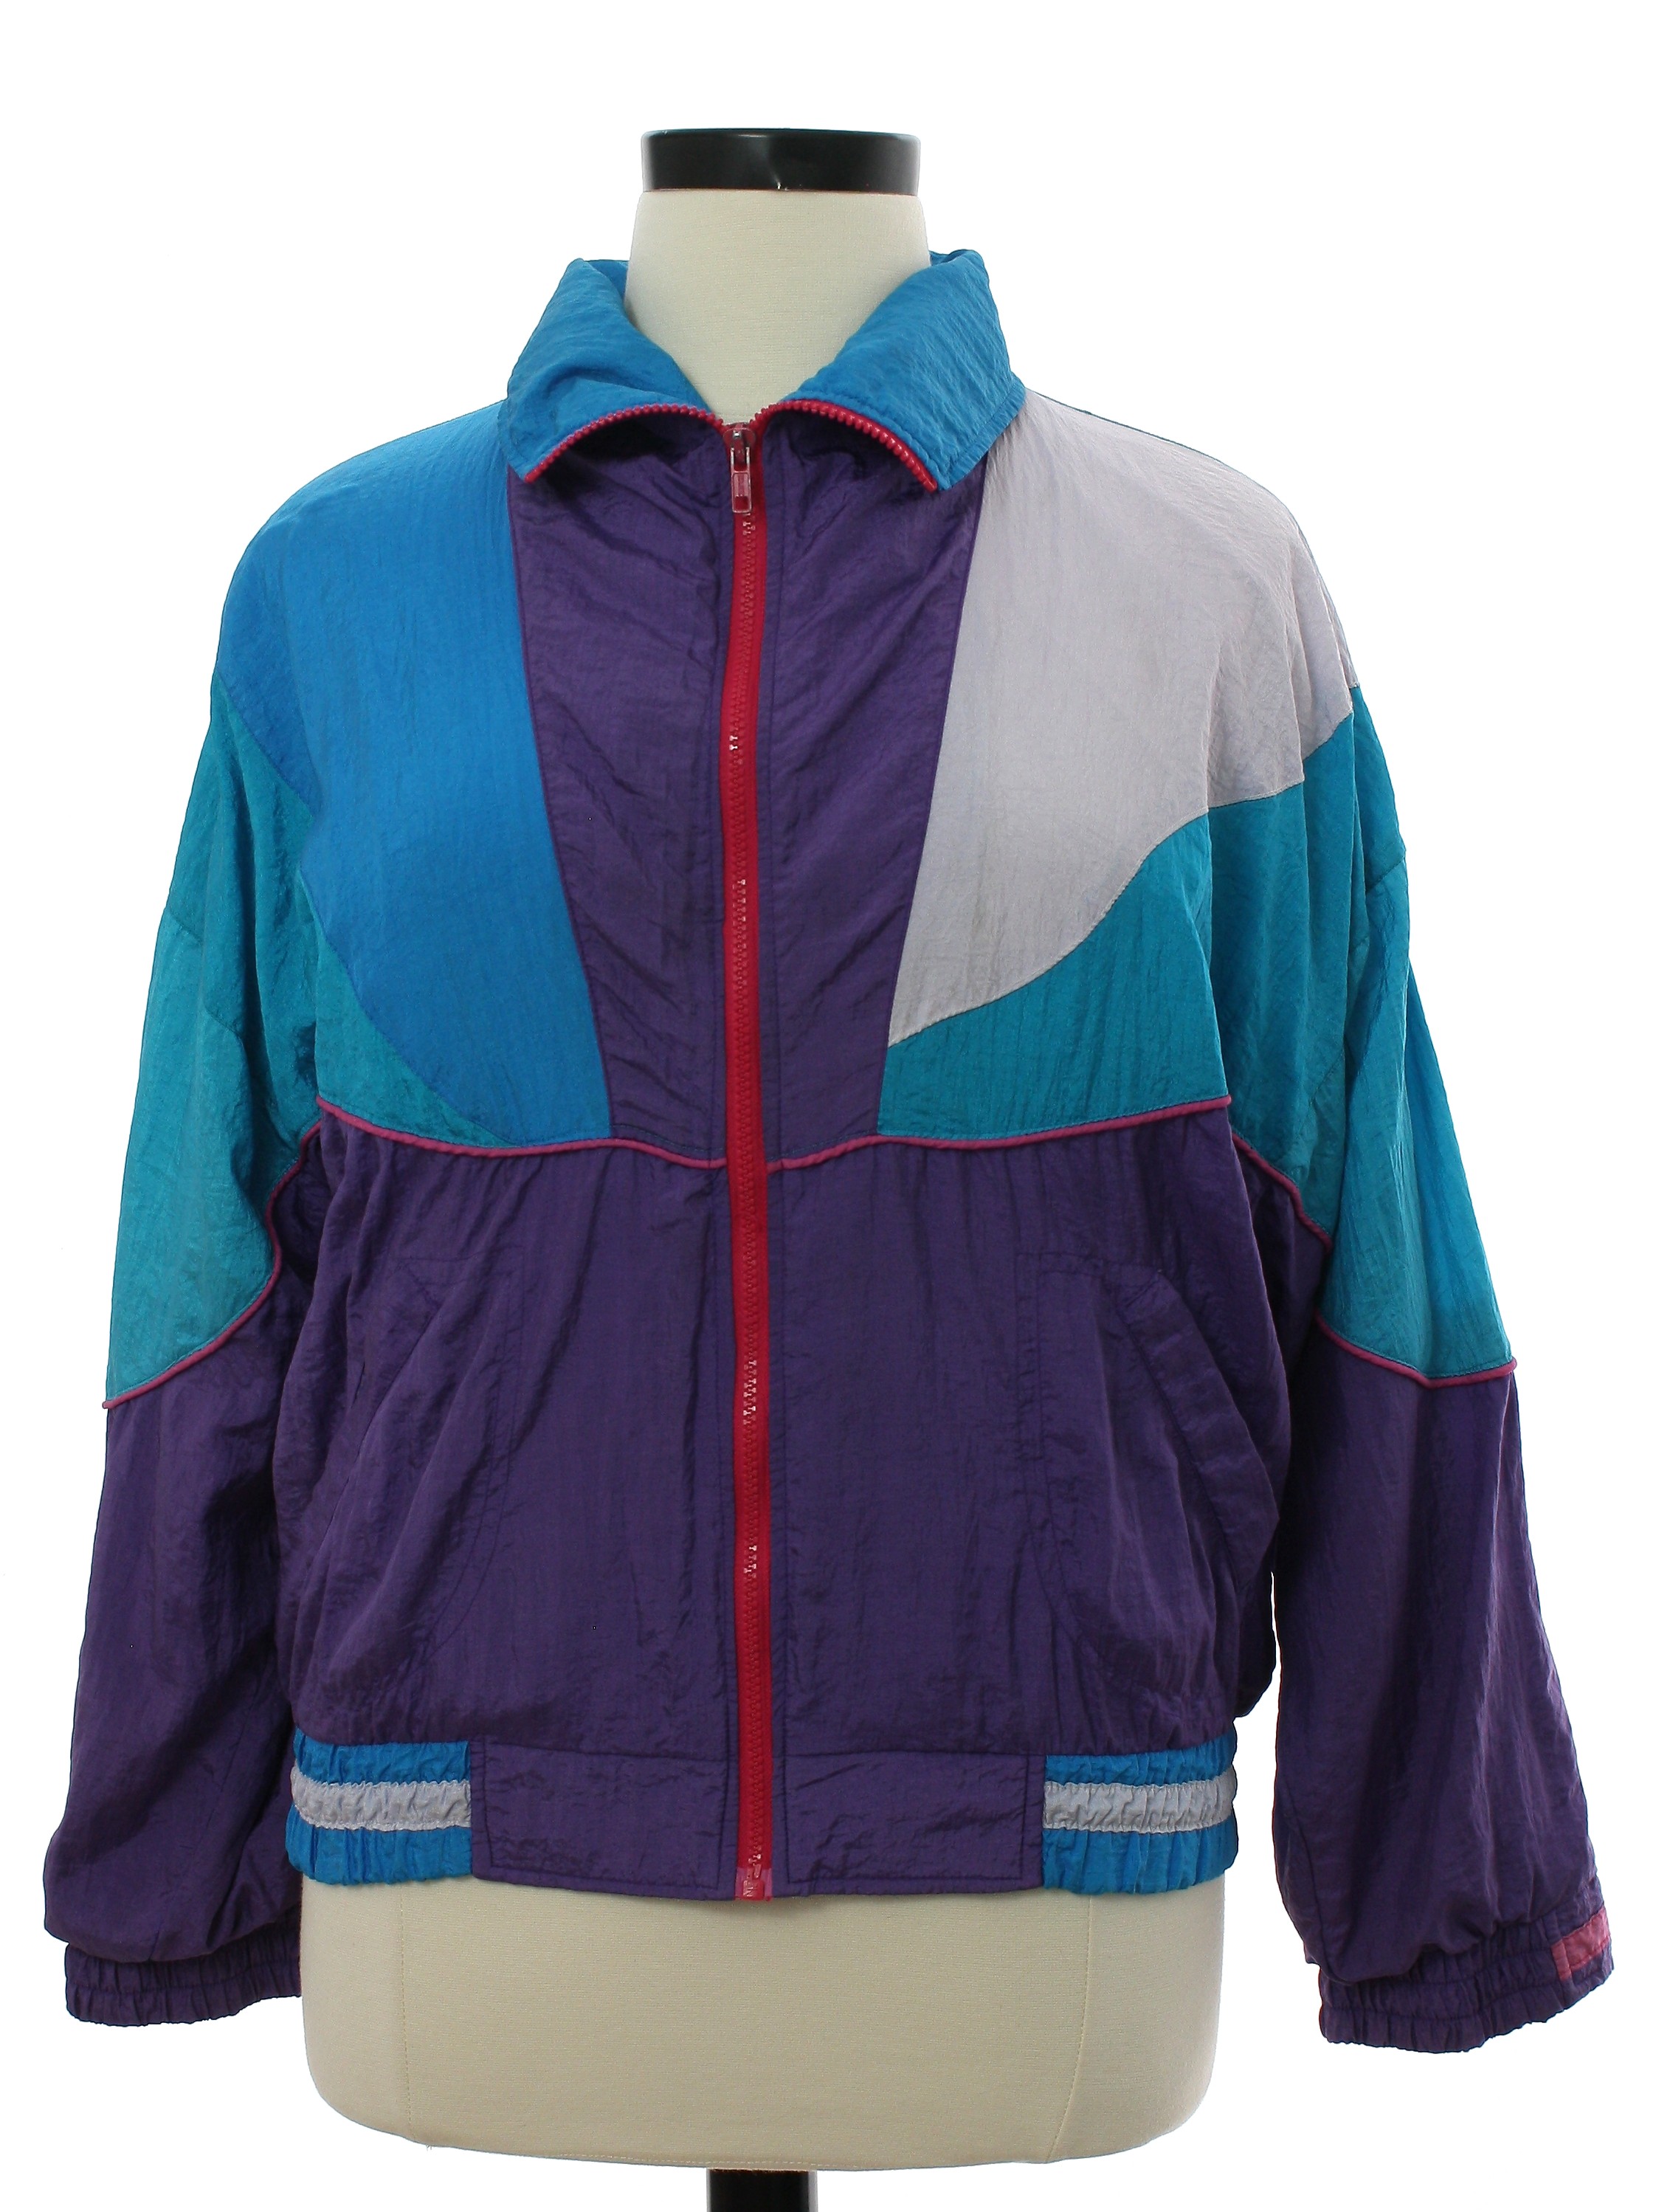 90s Vintage Westside Connection Jacket: 80s style (made in 90s) -Westside  Connection- Womens purple background nylon shell elastic cuff dolman  longsleeve zip front windbreaker zip jacket. Color blocked pattern in  shades of